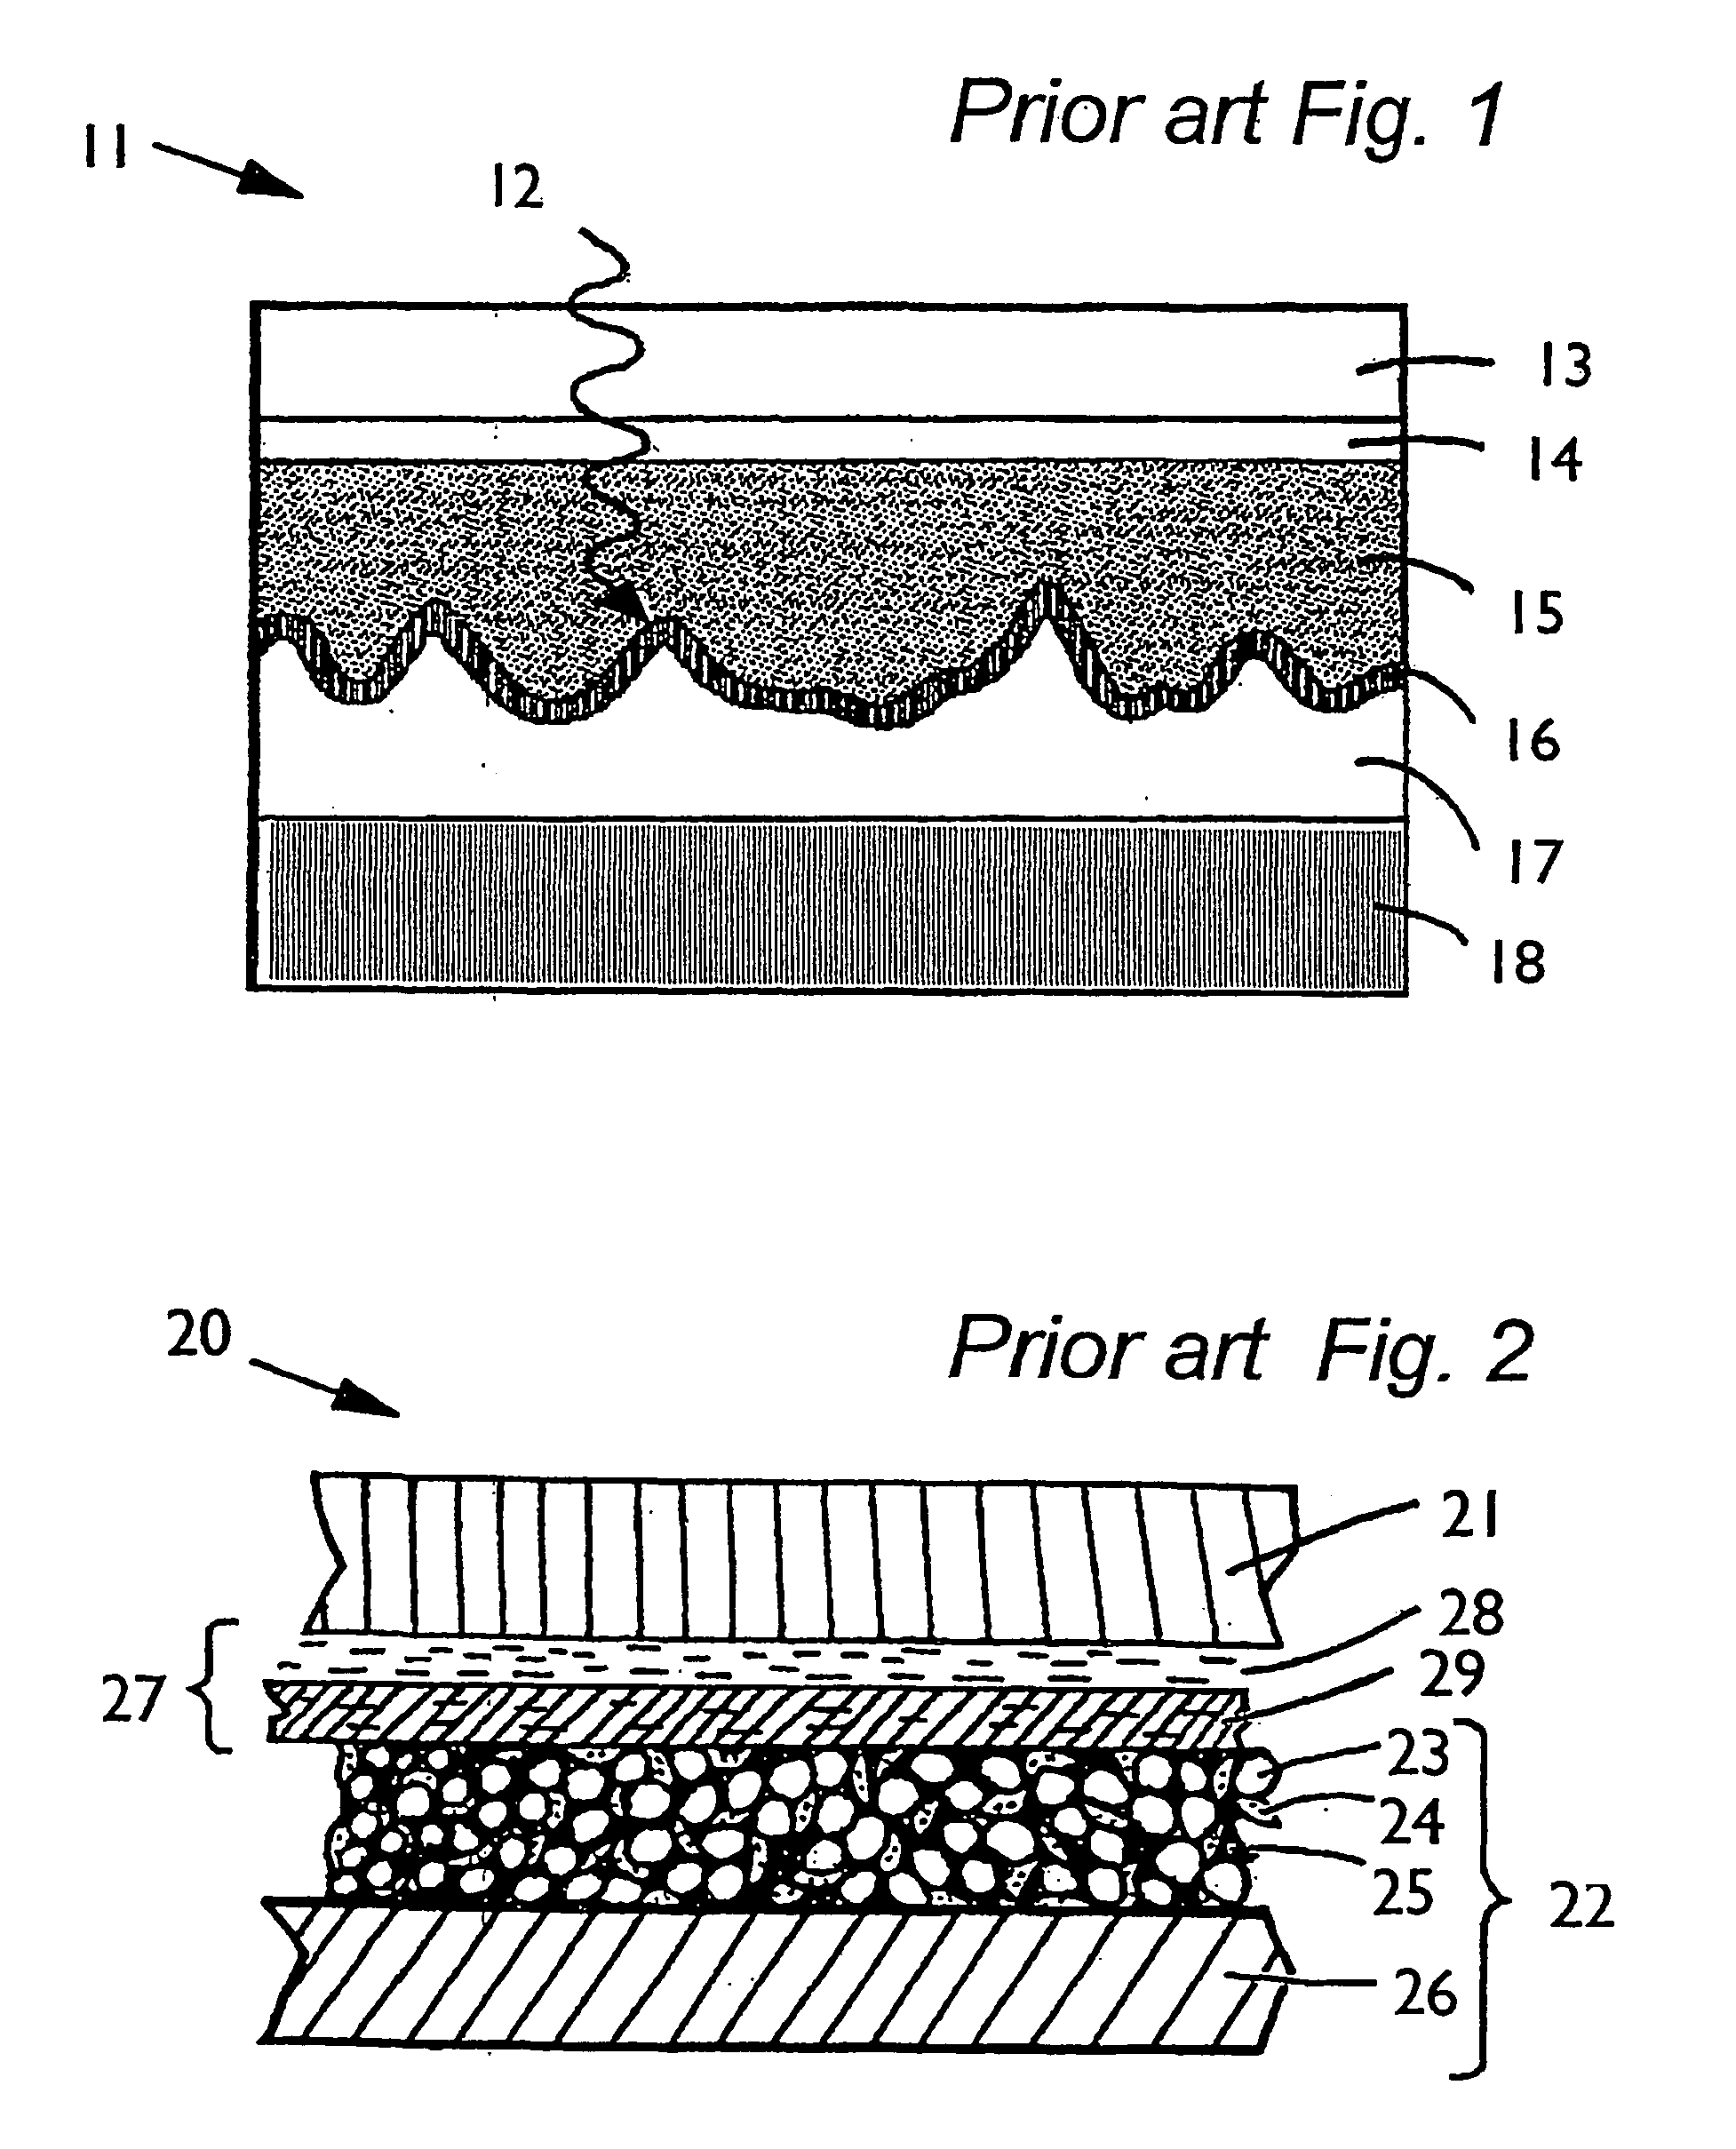 Mesoporous network electrode for electrochemical cell